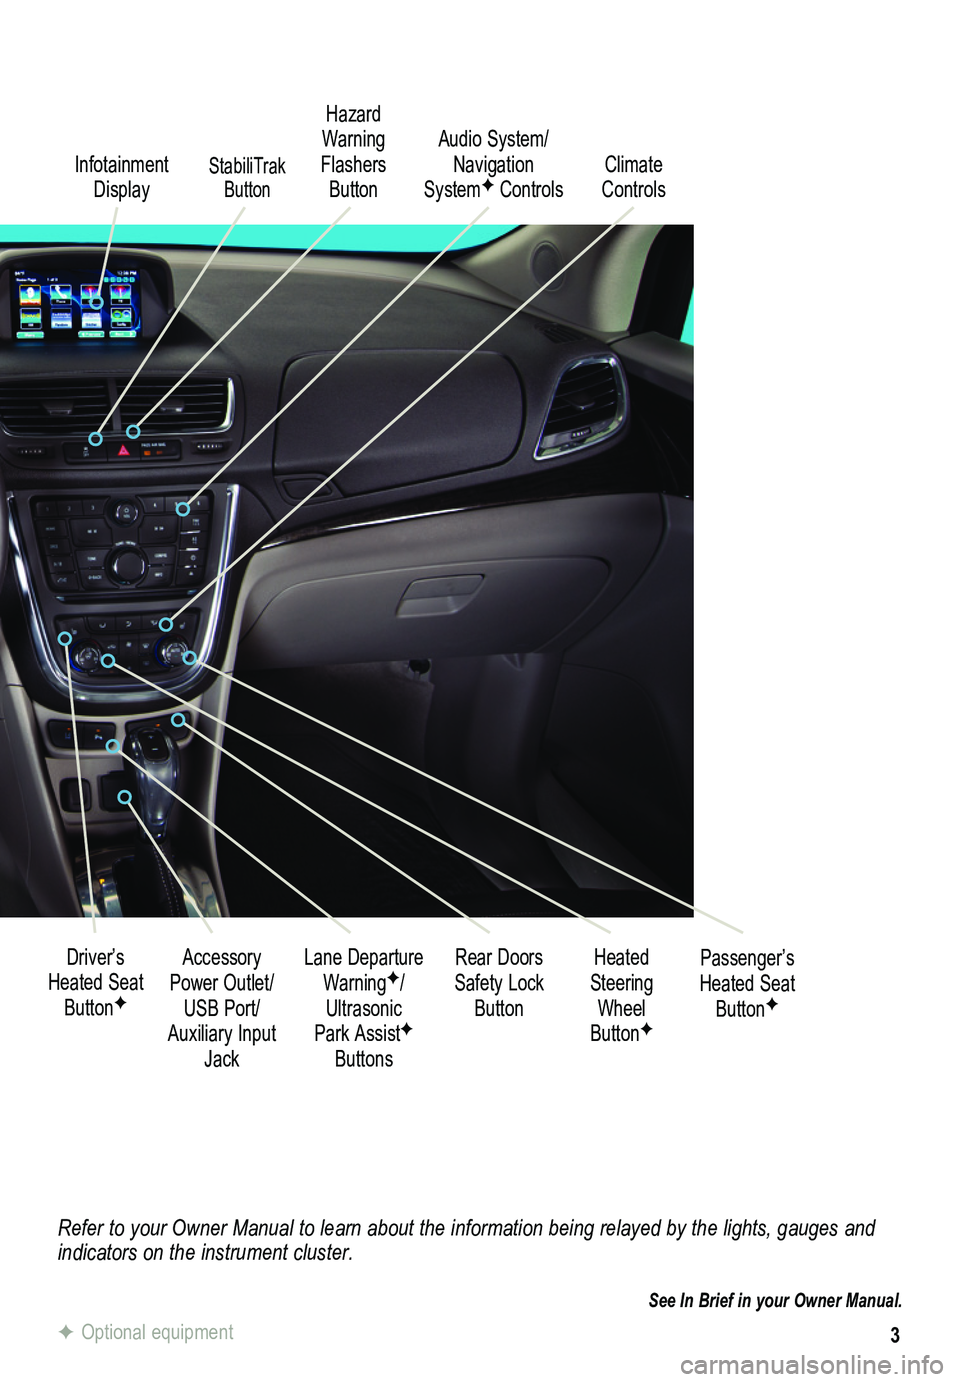 BUICK ENCORE 2014  Get To Know Guide 3
Refer to your Owner Manual to learn about the information being relayed \
by the lights, gauges and indicators on the instrument cluster.
See In Brief in your Owner Manual.
Infotainment Display
Rear